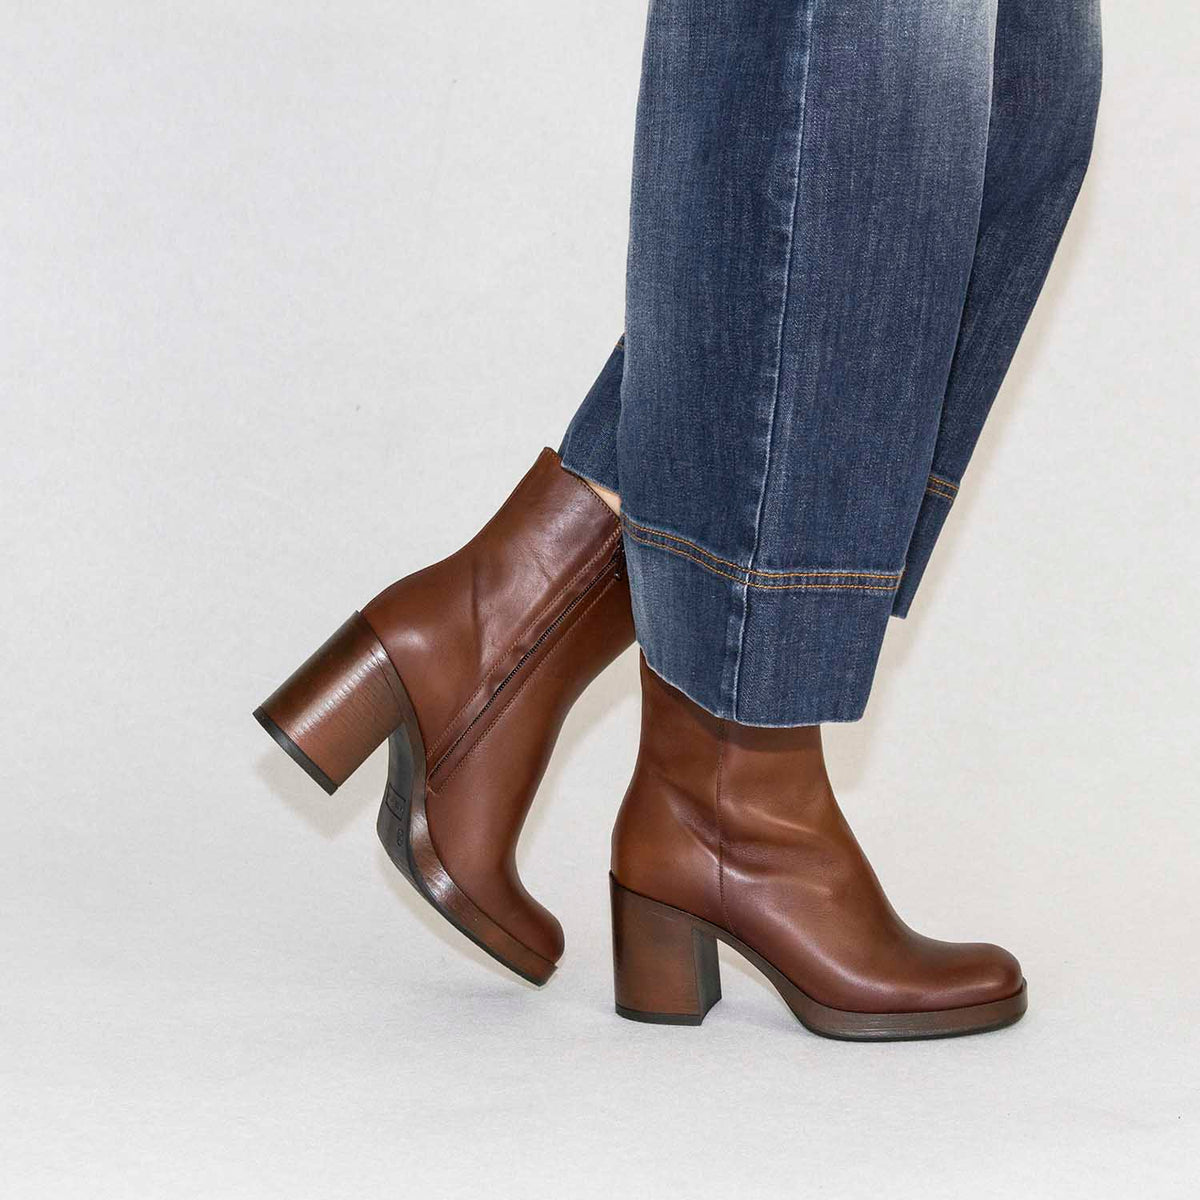 Women's ankle boots in brown leather with square heel 